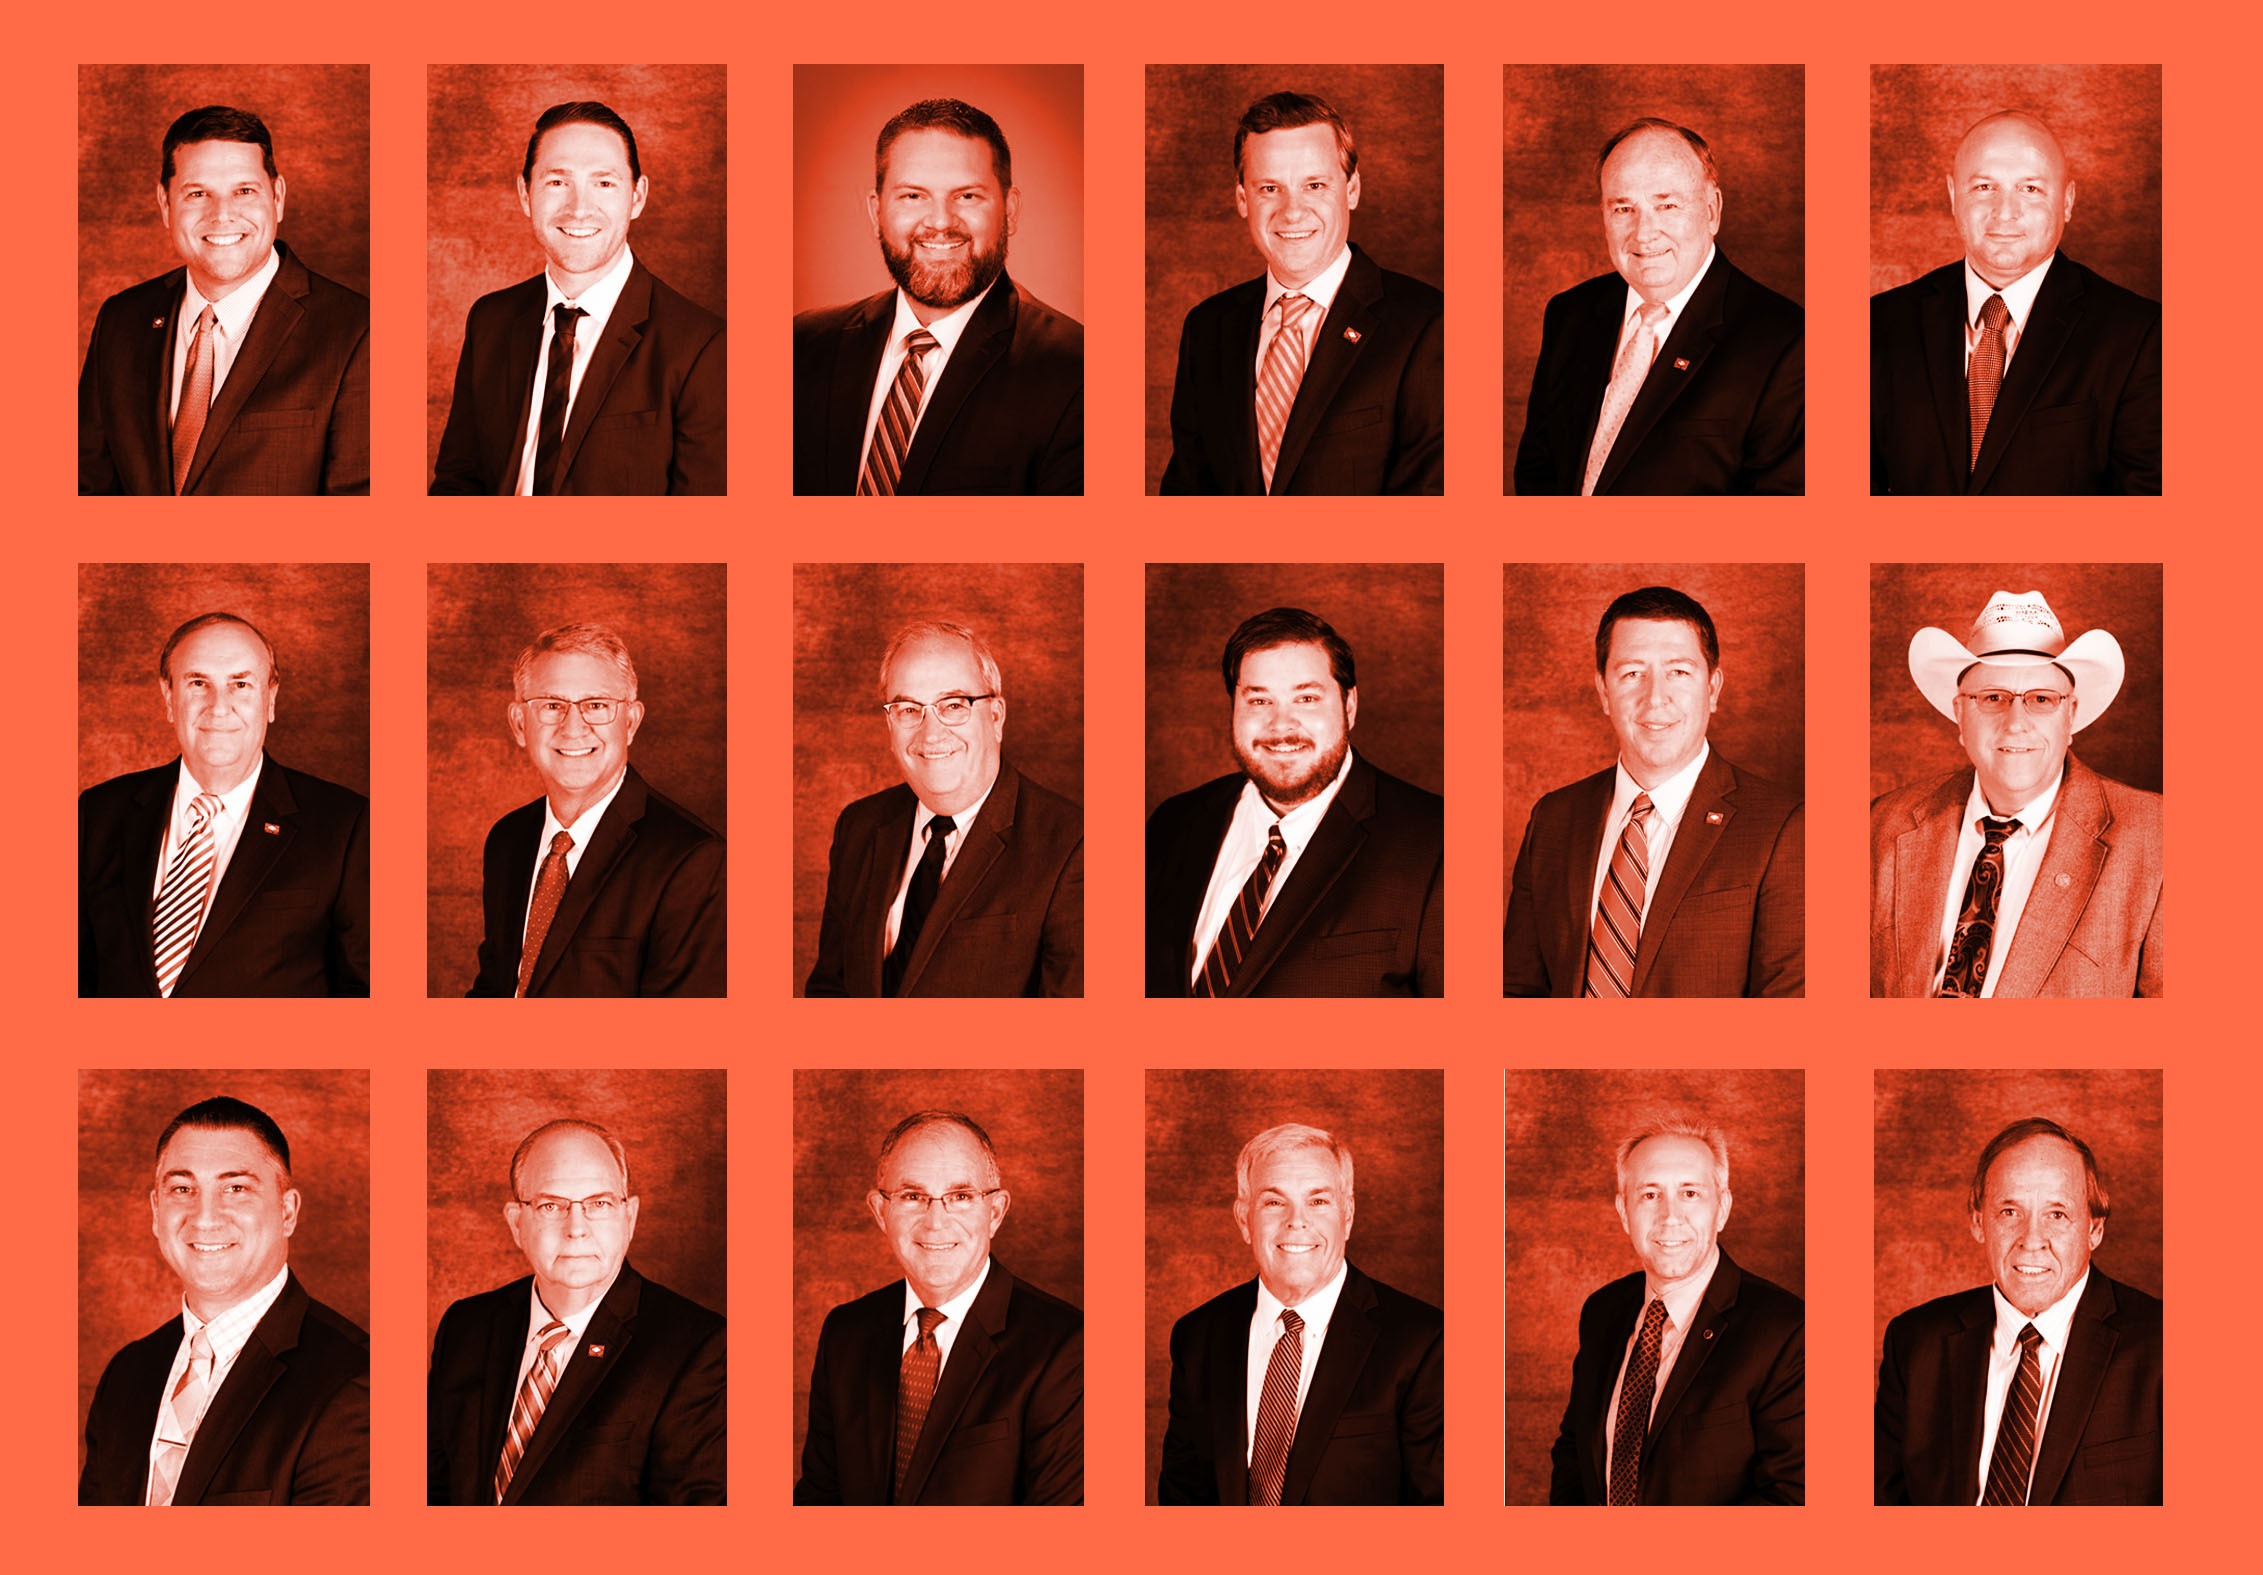 18 white men in the Senate vote to end Affirmative Action